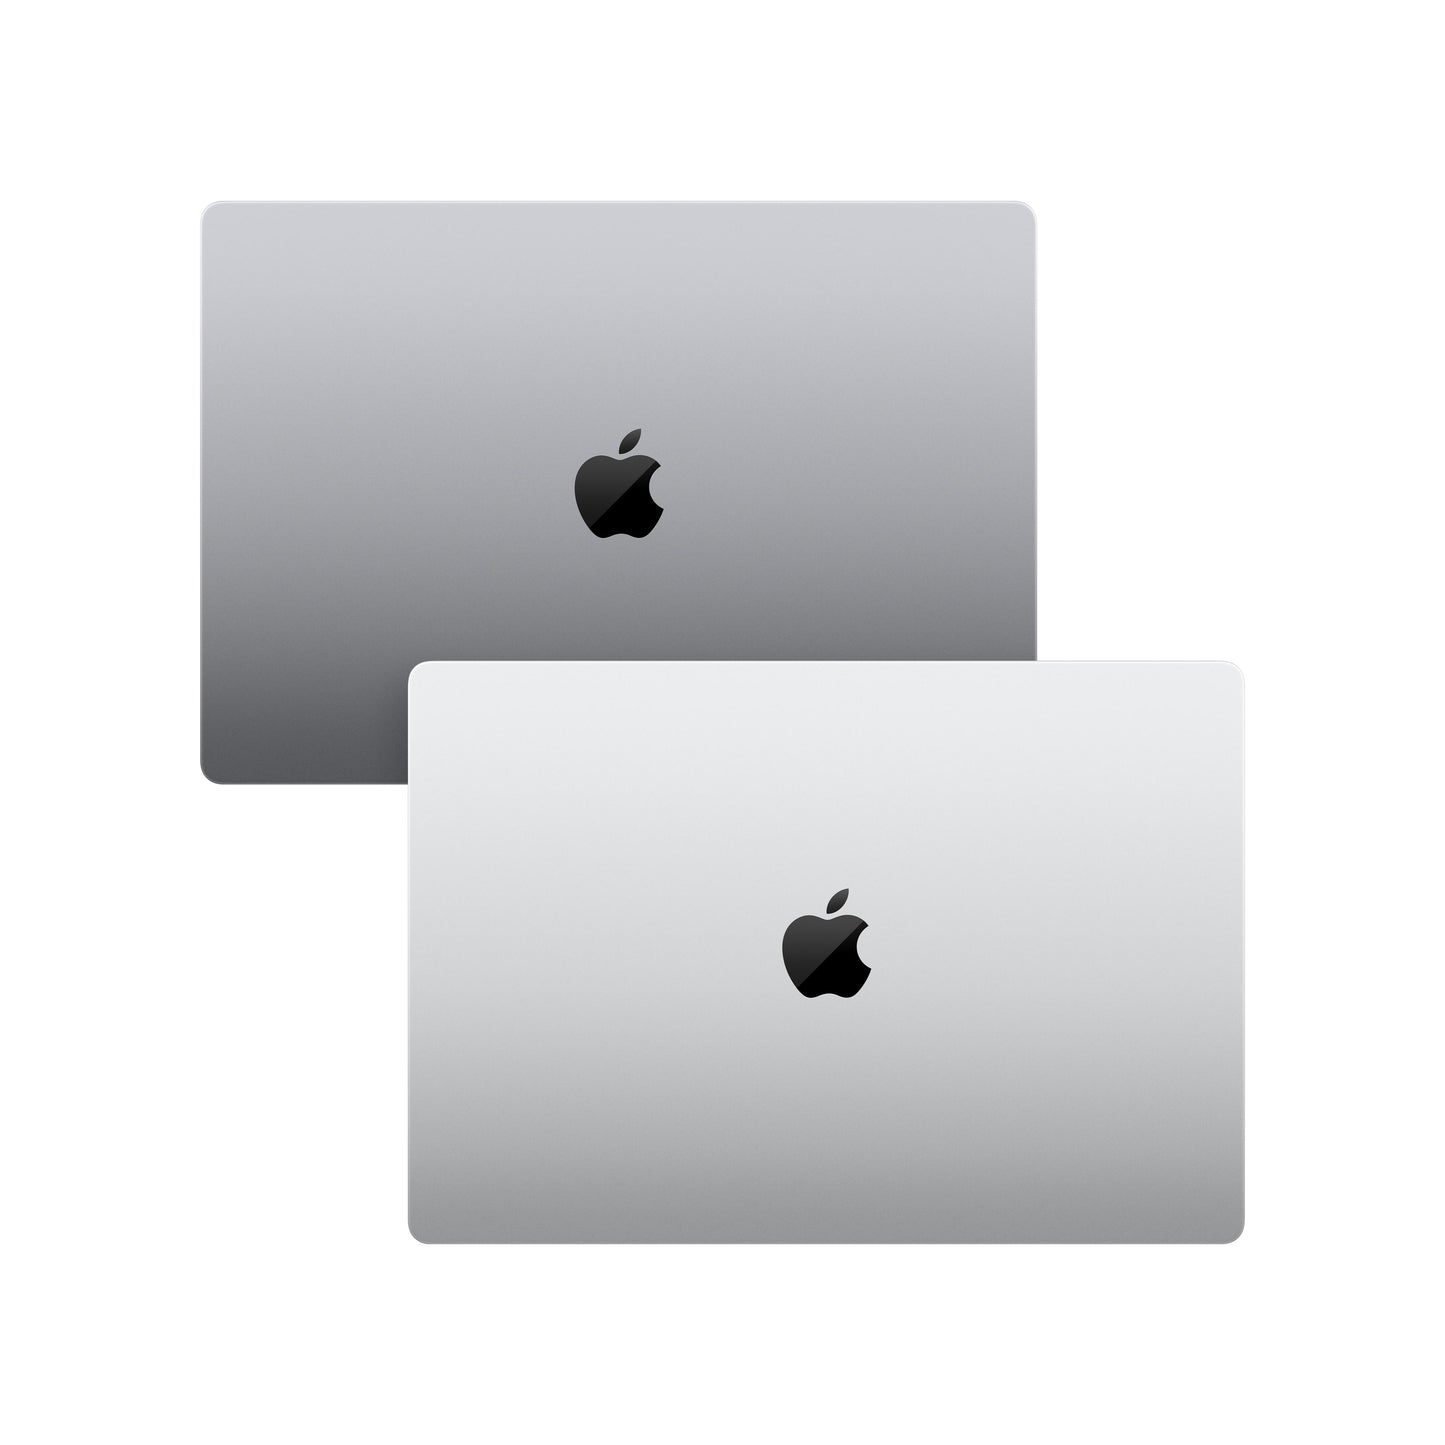 16-inch MacBook Pro: Apple M1 Max chip with 10_core CPU and 32_core GPU 1TB SSD - Space Grey